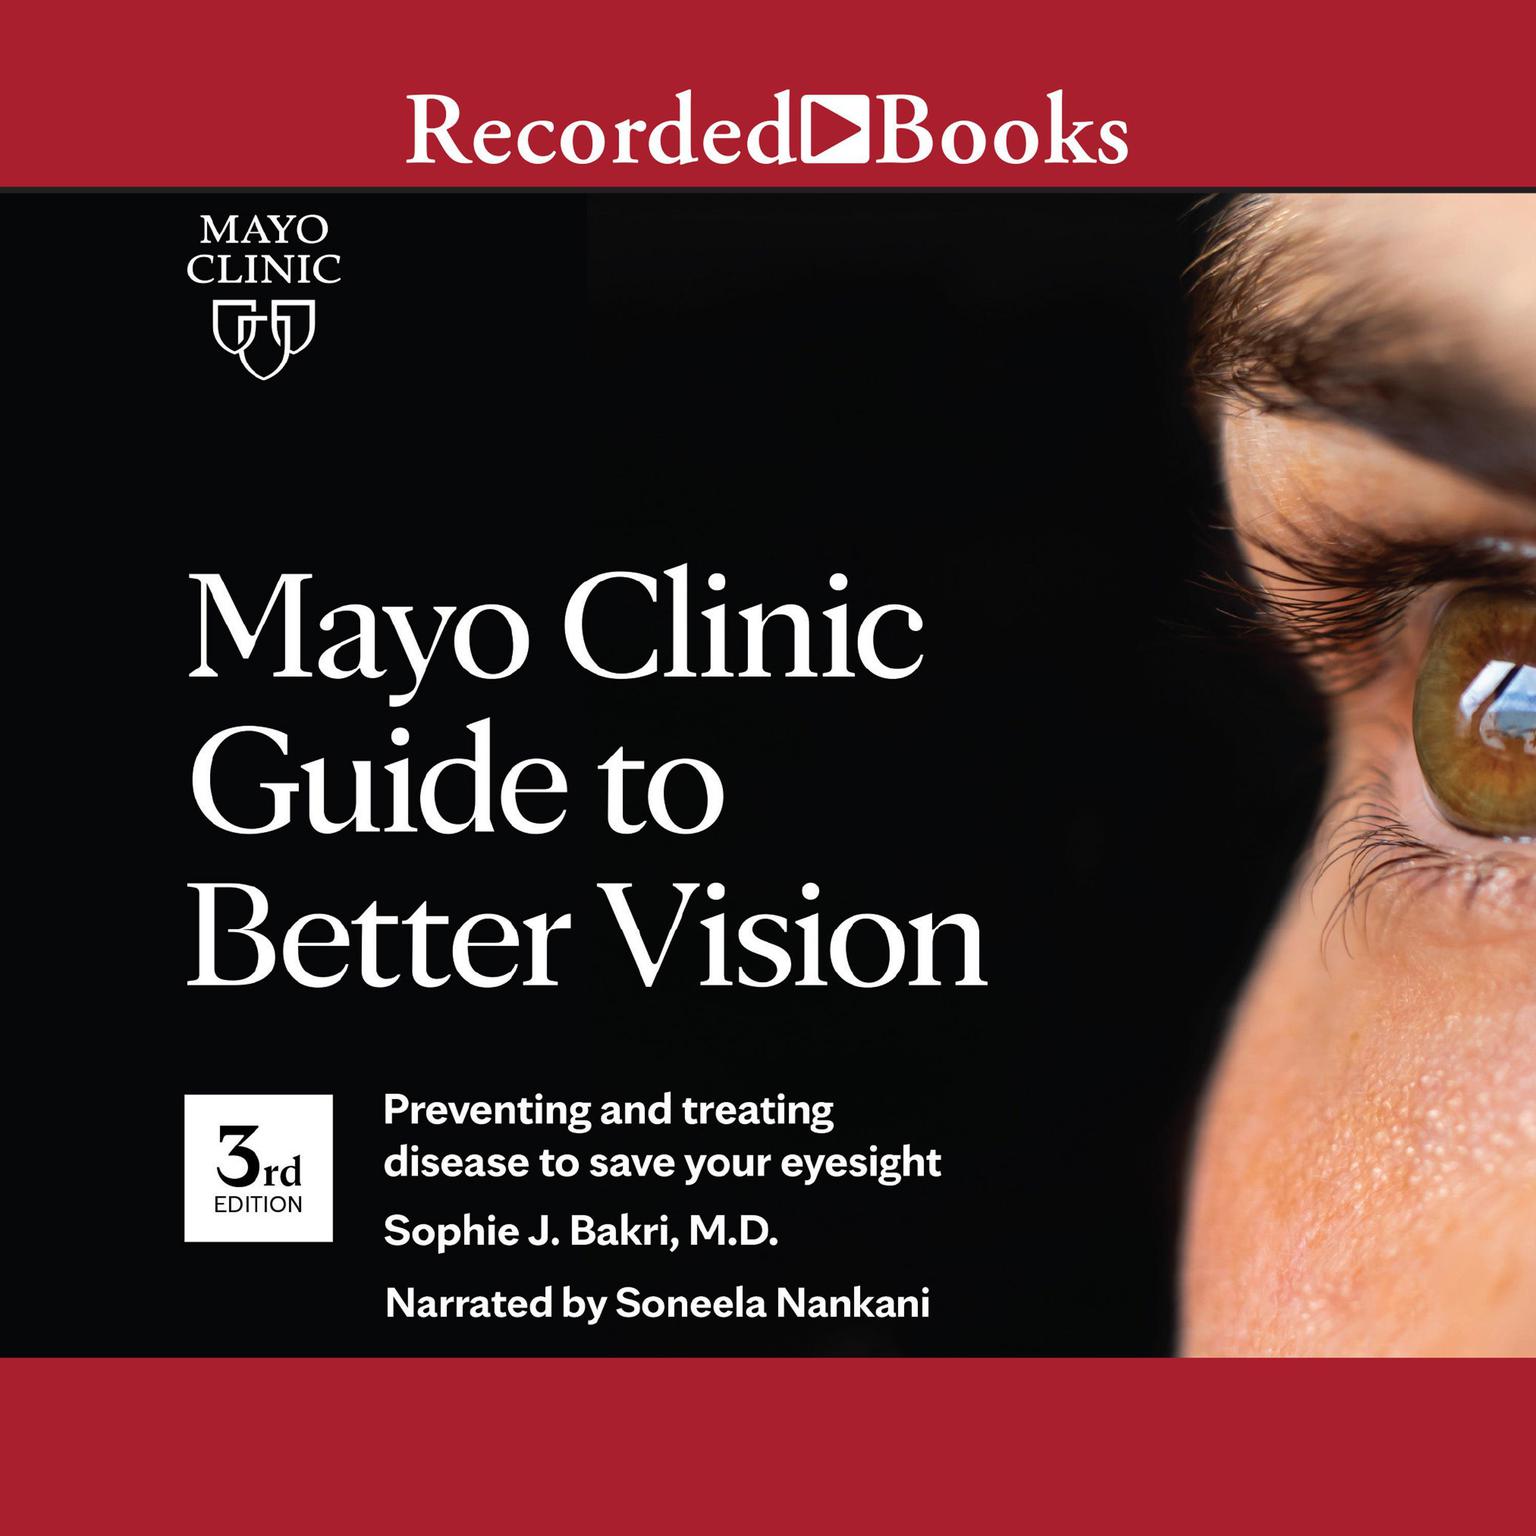 Mayo Clinic Guide to Better Vision (3rd Ed): Preventing and treating disease to save your eyesight Audiobook, by Sophie J. Bakri